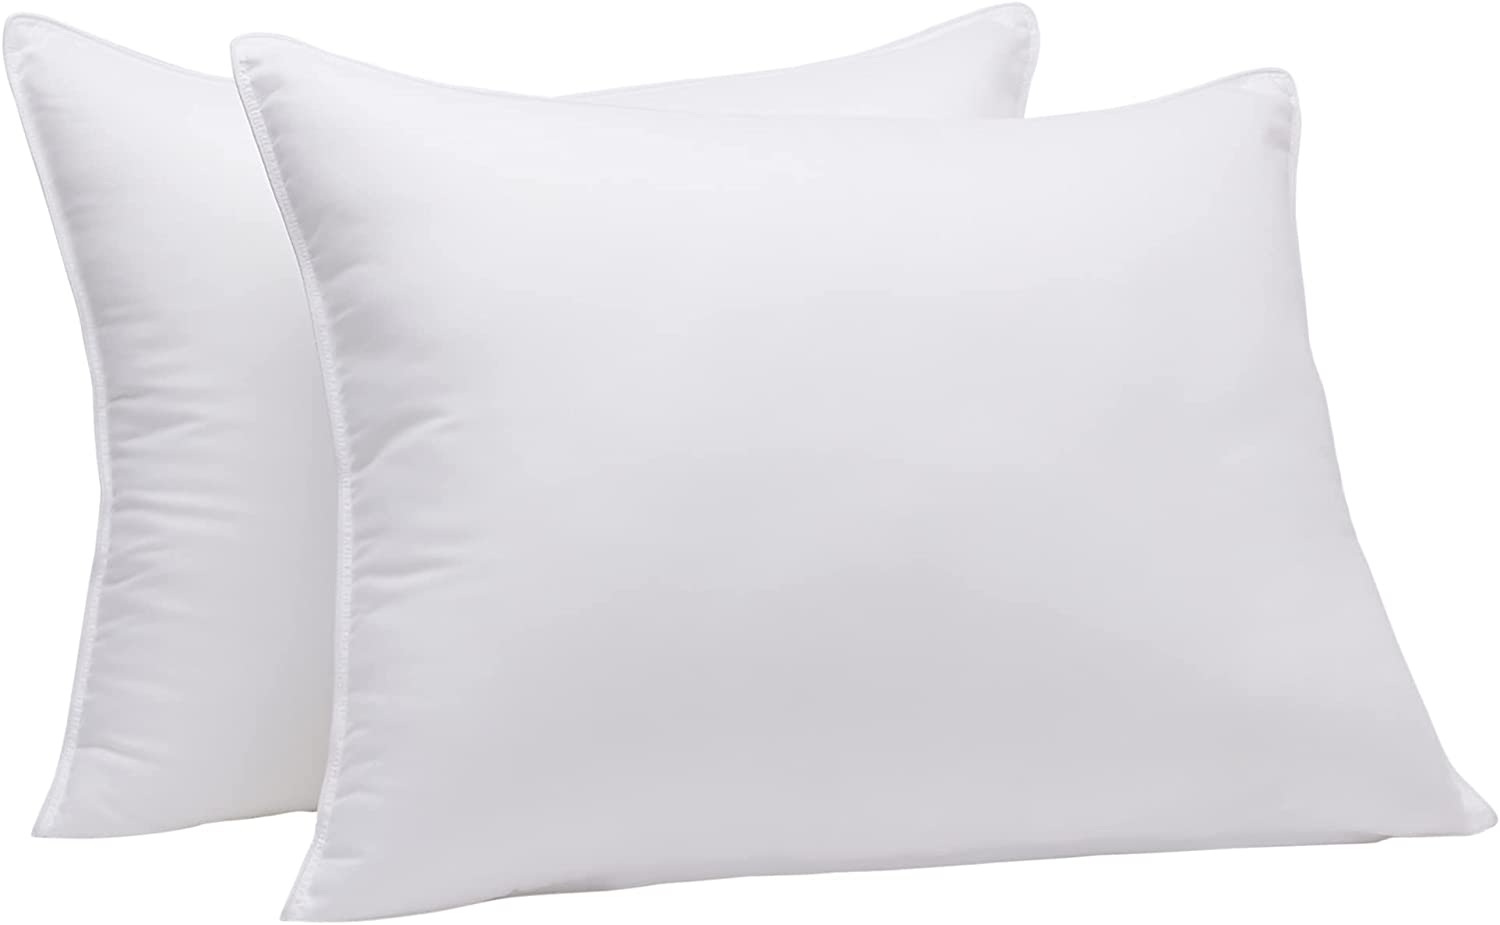 AmazonBasics Down Alternative Pillow For Stomach Sleepers, Set Of 9